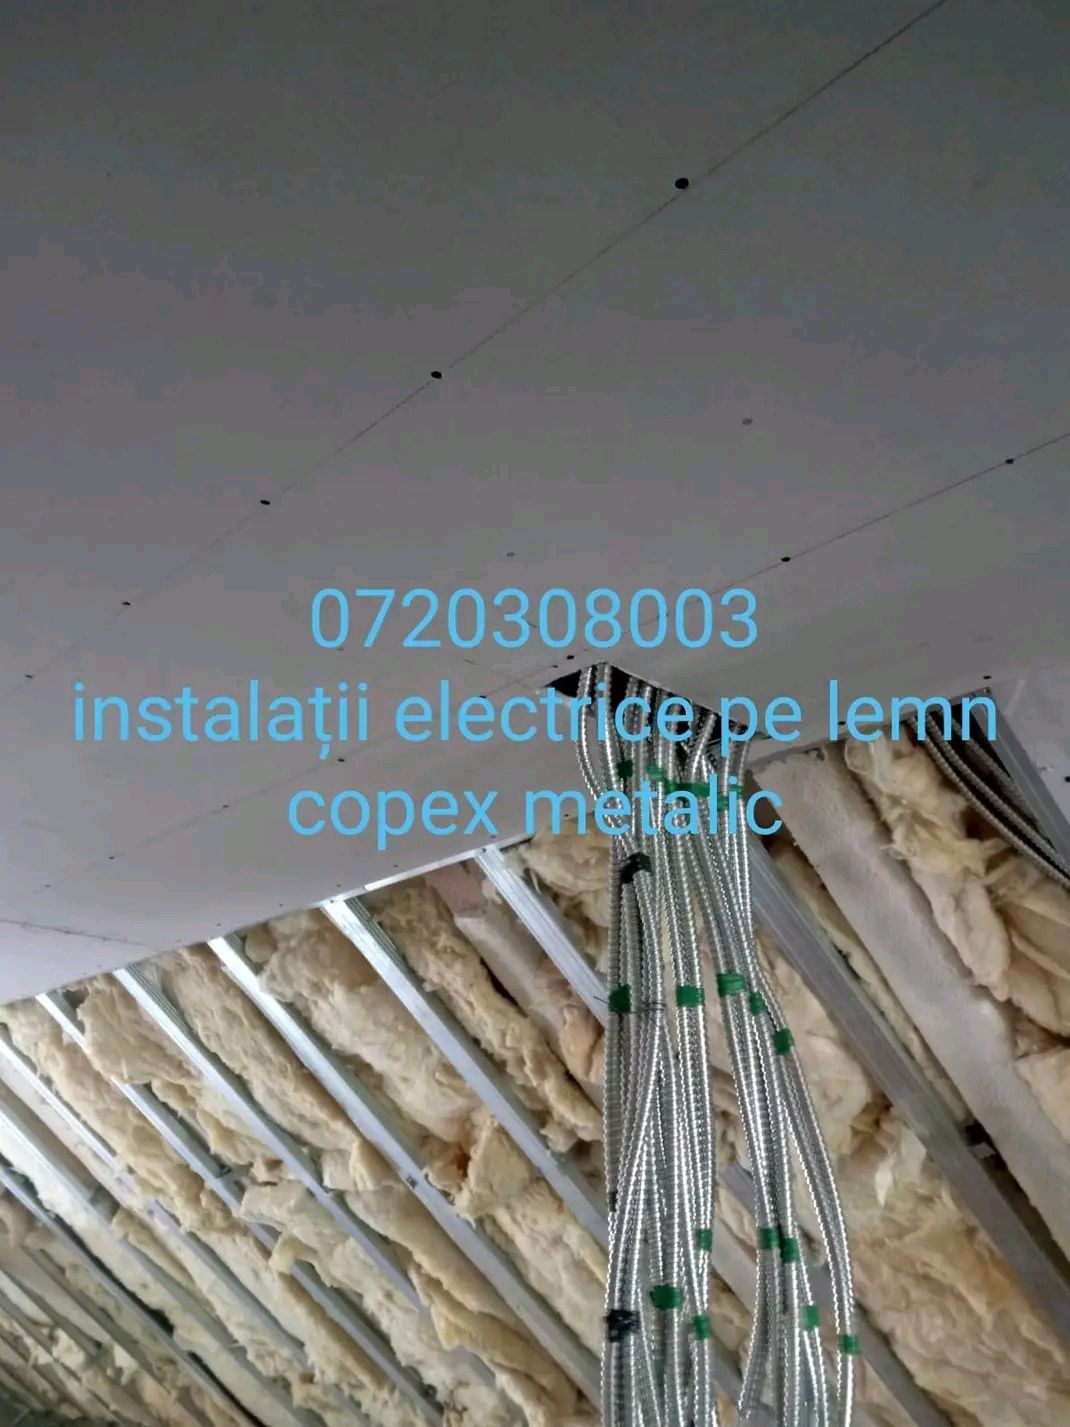 Electrician Instalatii electrice in general